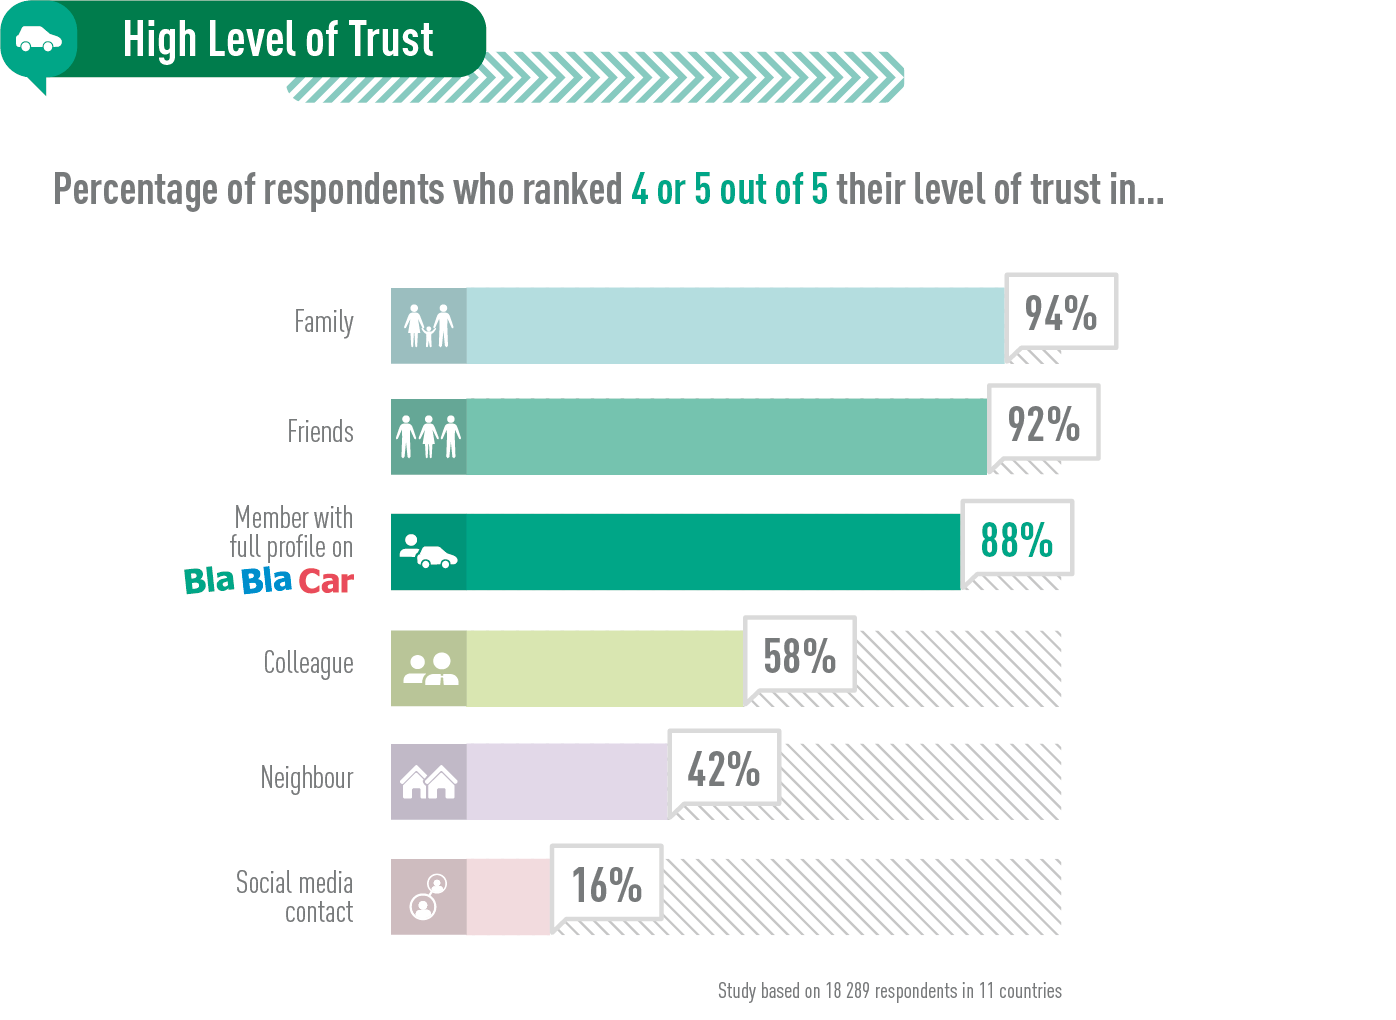 Trust system relevancy.Illustration on the amount of level of trust by bla-bla-car. Percentage of respondents who ranked 4 or 5 of 5 their level of trust in Family (94%), Friends (92%), Member with full profile on bla-bla-car (88%), Colleague (58%), Neighbour (42%), Social Media Contact (16%). (Study based on 18289 respondents in 11 countries)